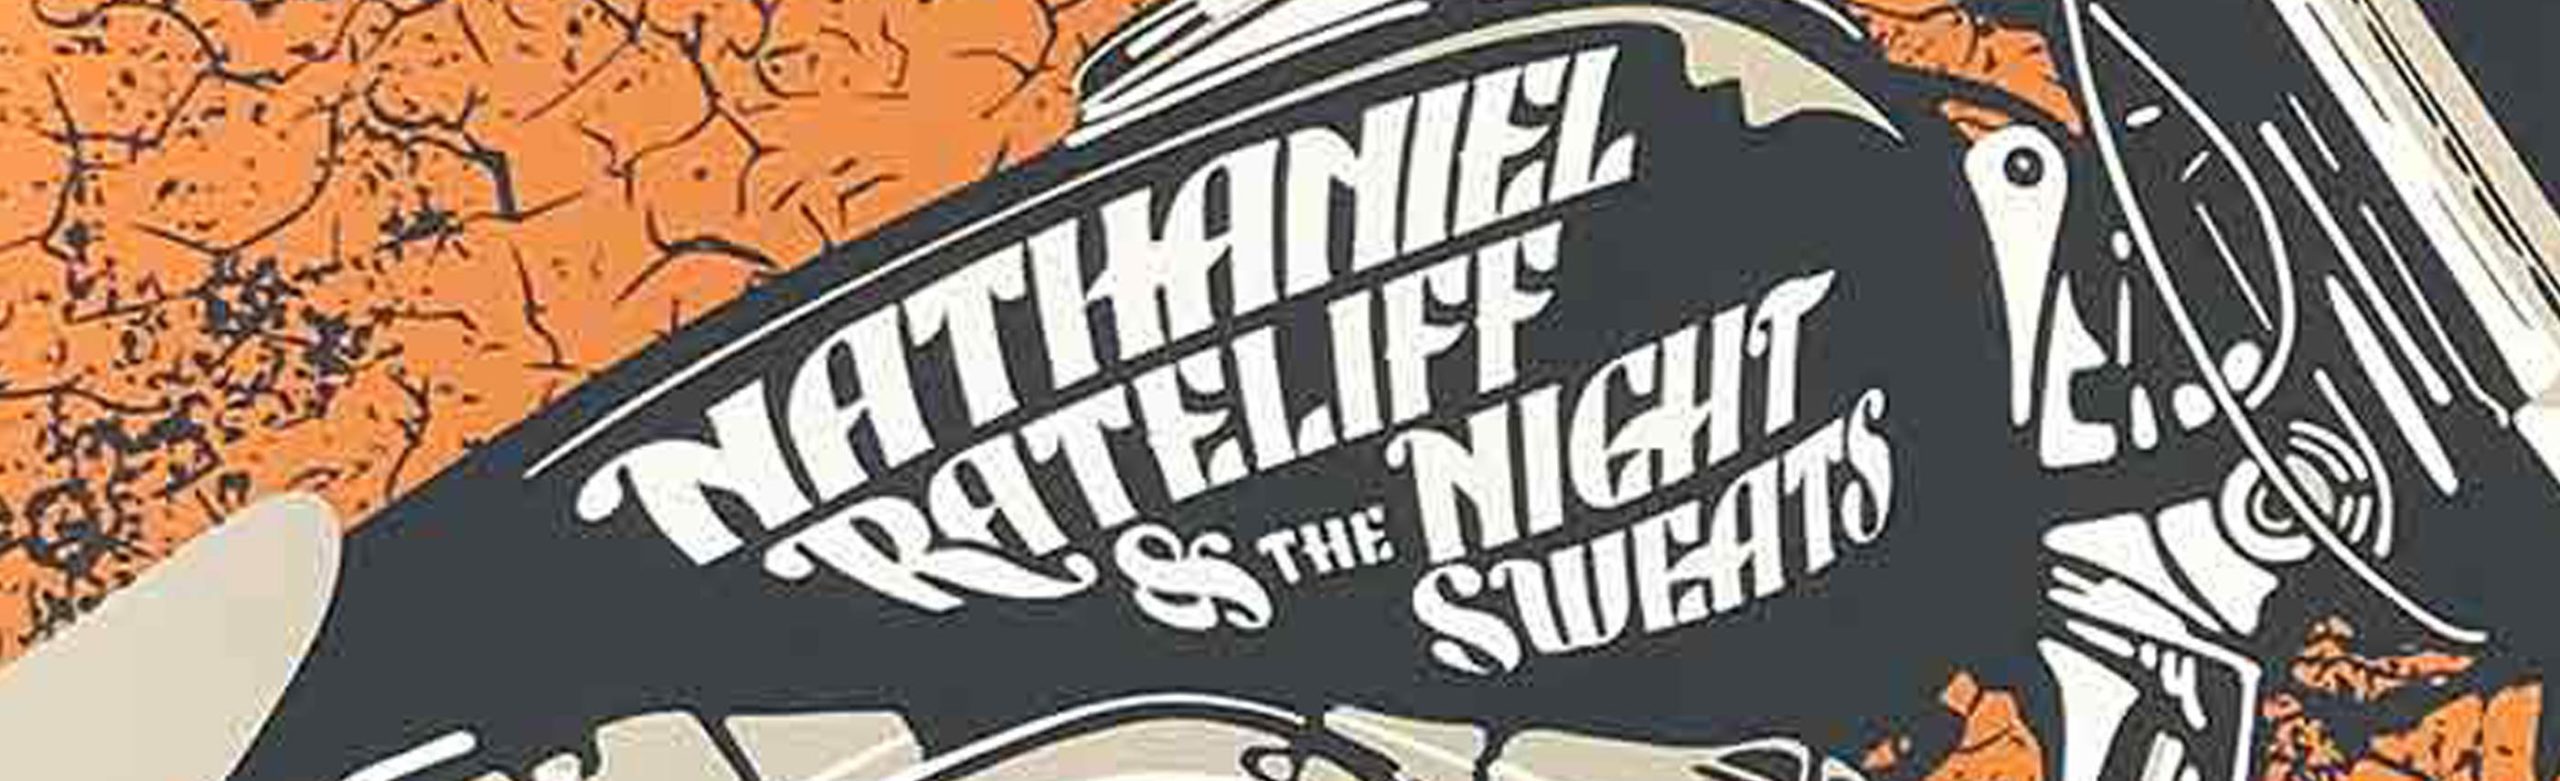 Custom Limited Edition Screenprint for Nathaniel Rateliff & The Night Sweats Image